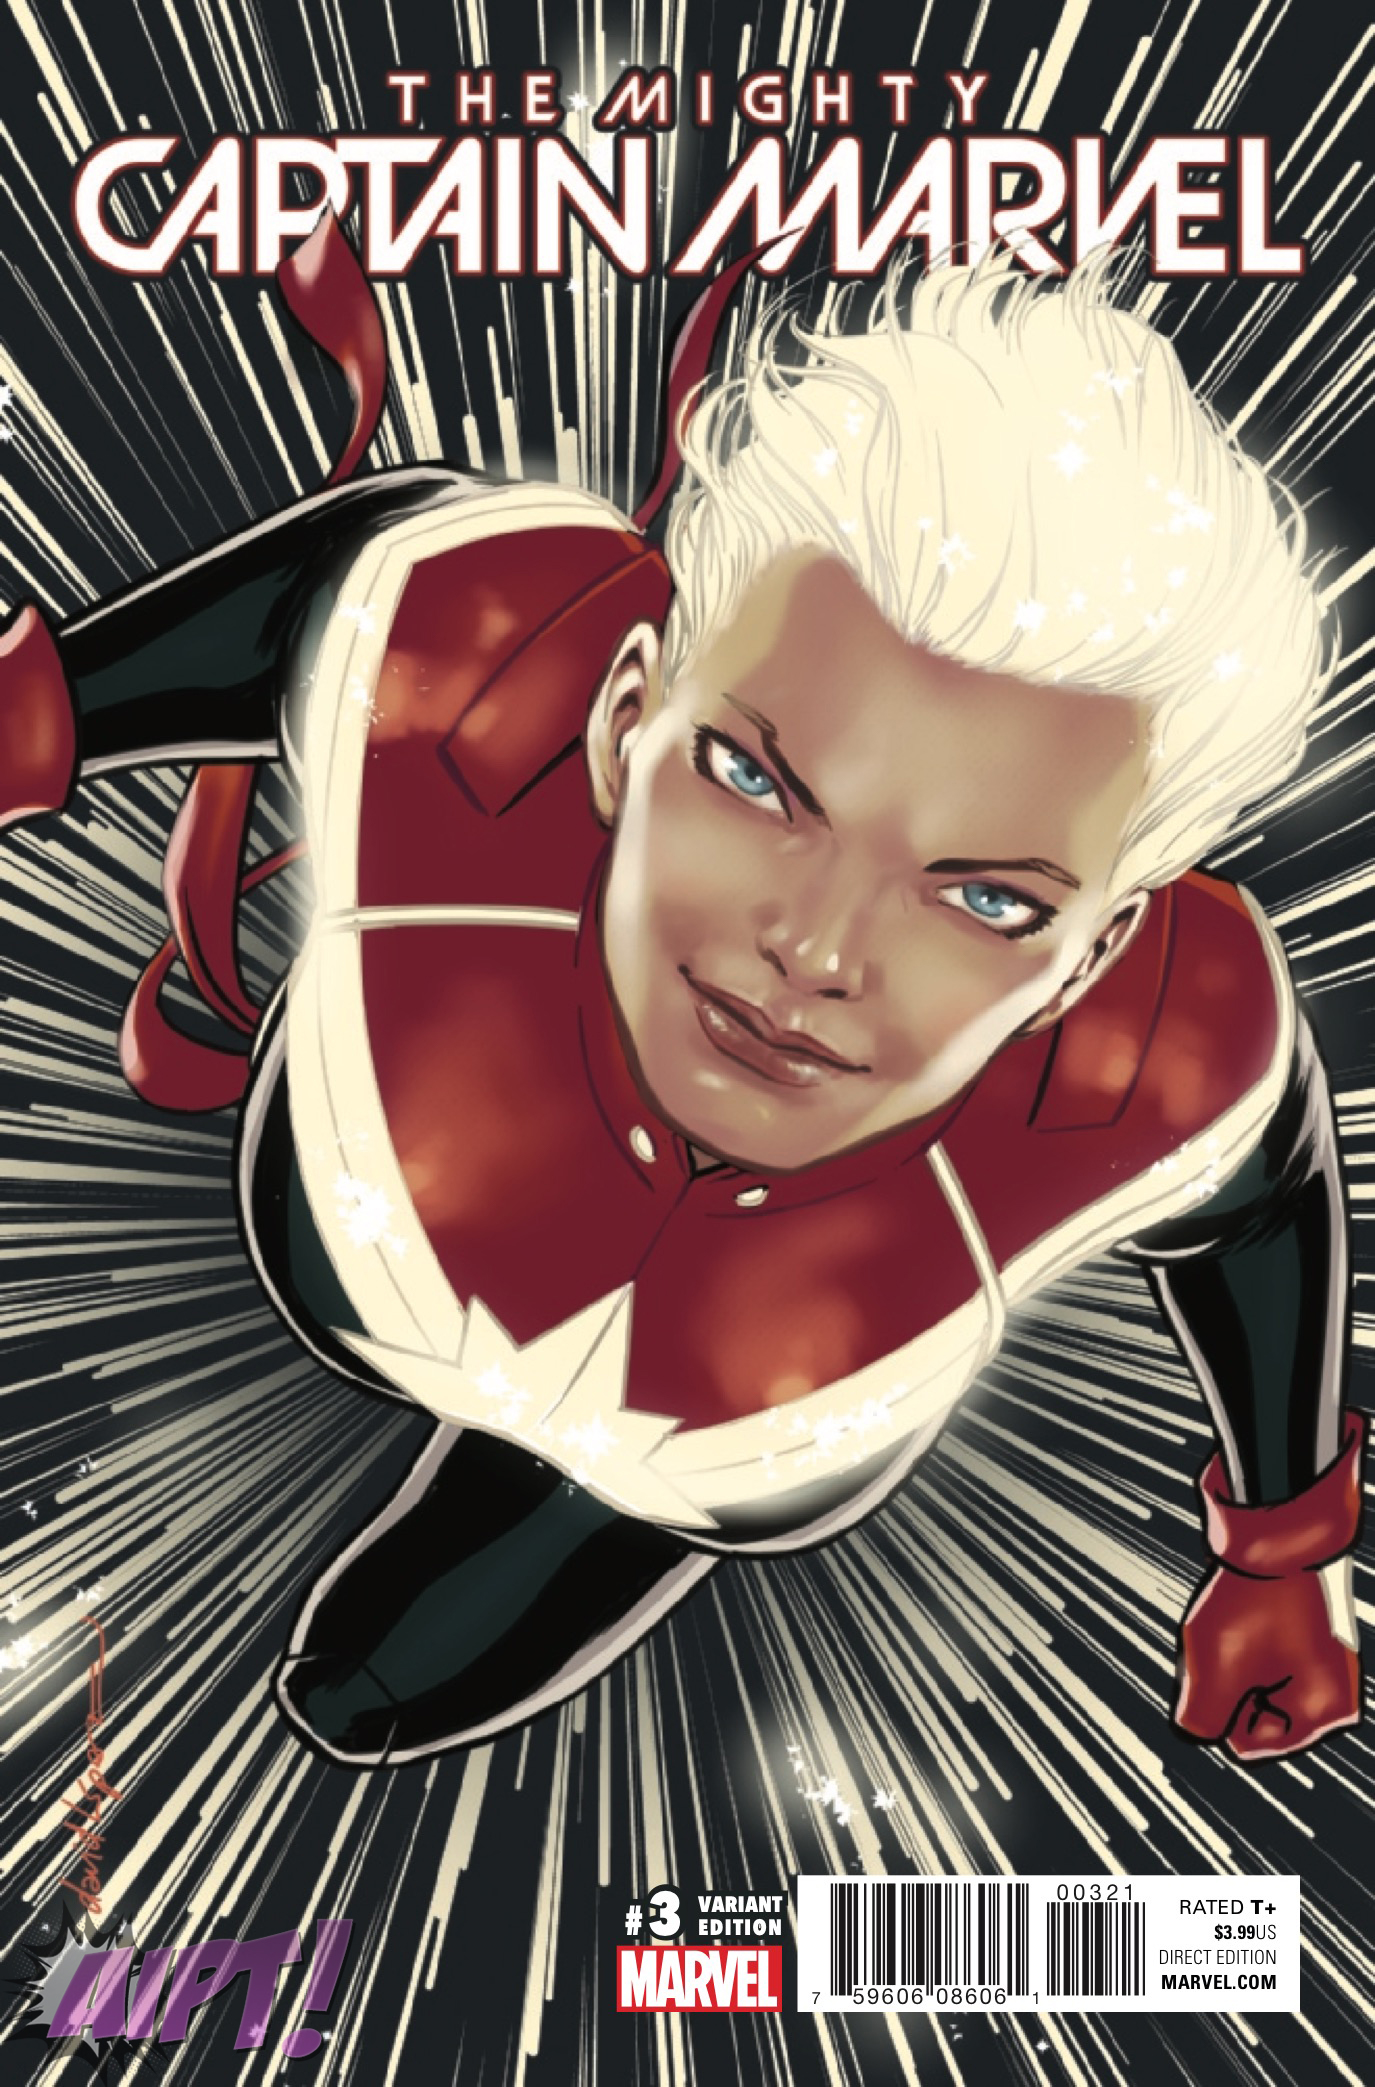 [EXCLUSIVE] Marvel Preview: The Mighty Captain Marvel #3